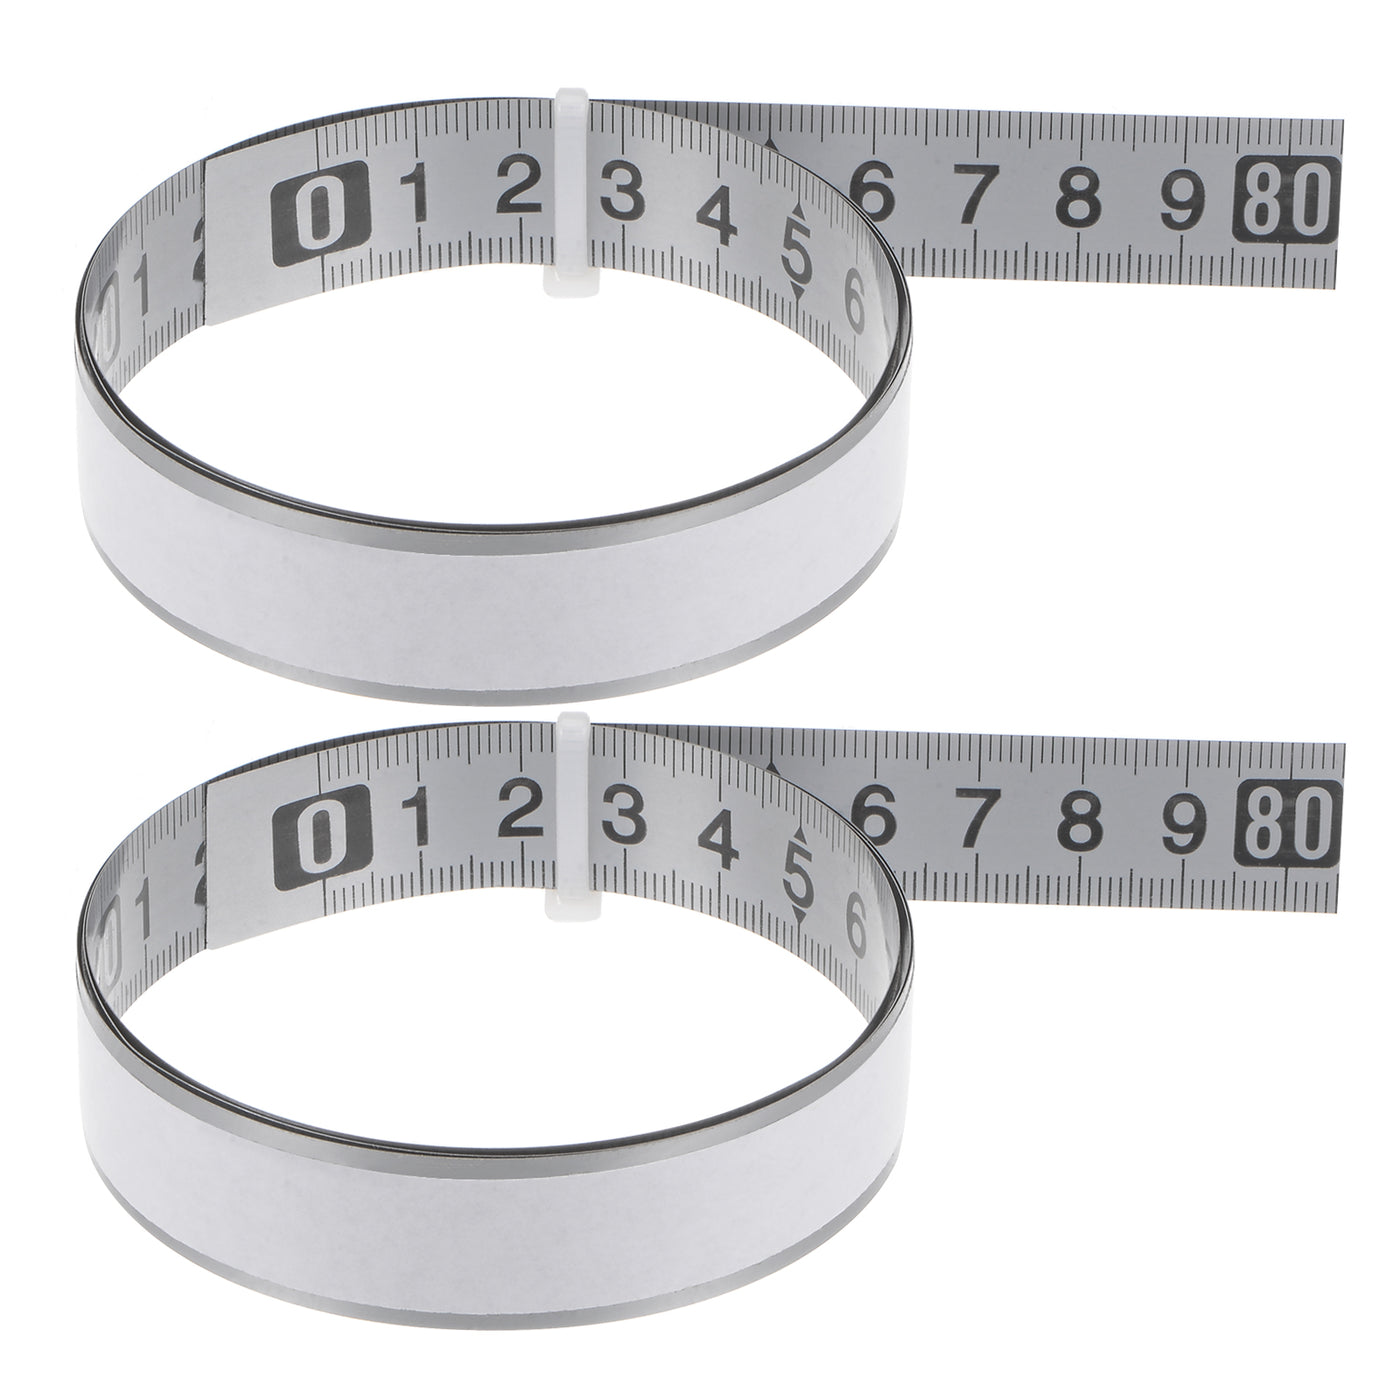 Harfington 2pcs Adhesive Tape Measure 80cm Left to Right Read Sticky Steel Ruler Tape 19mm